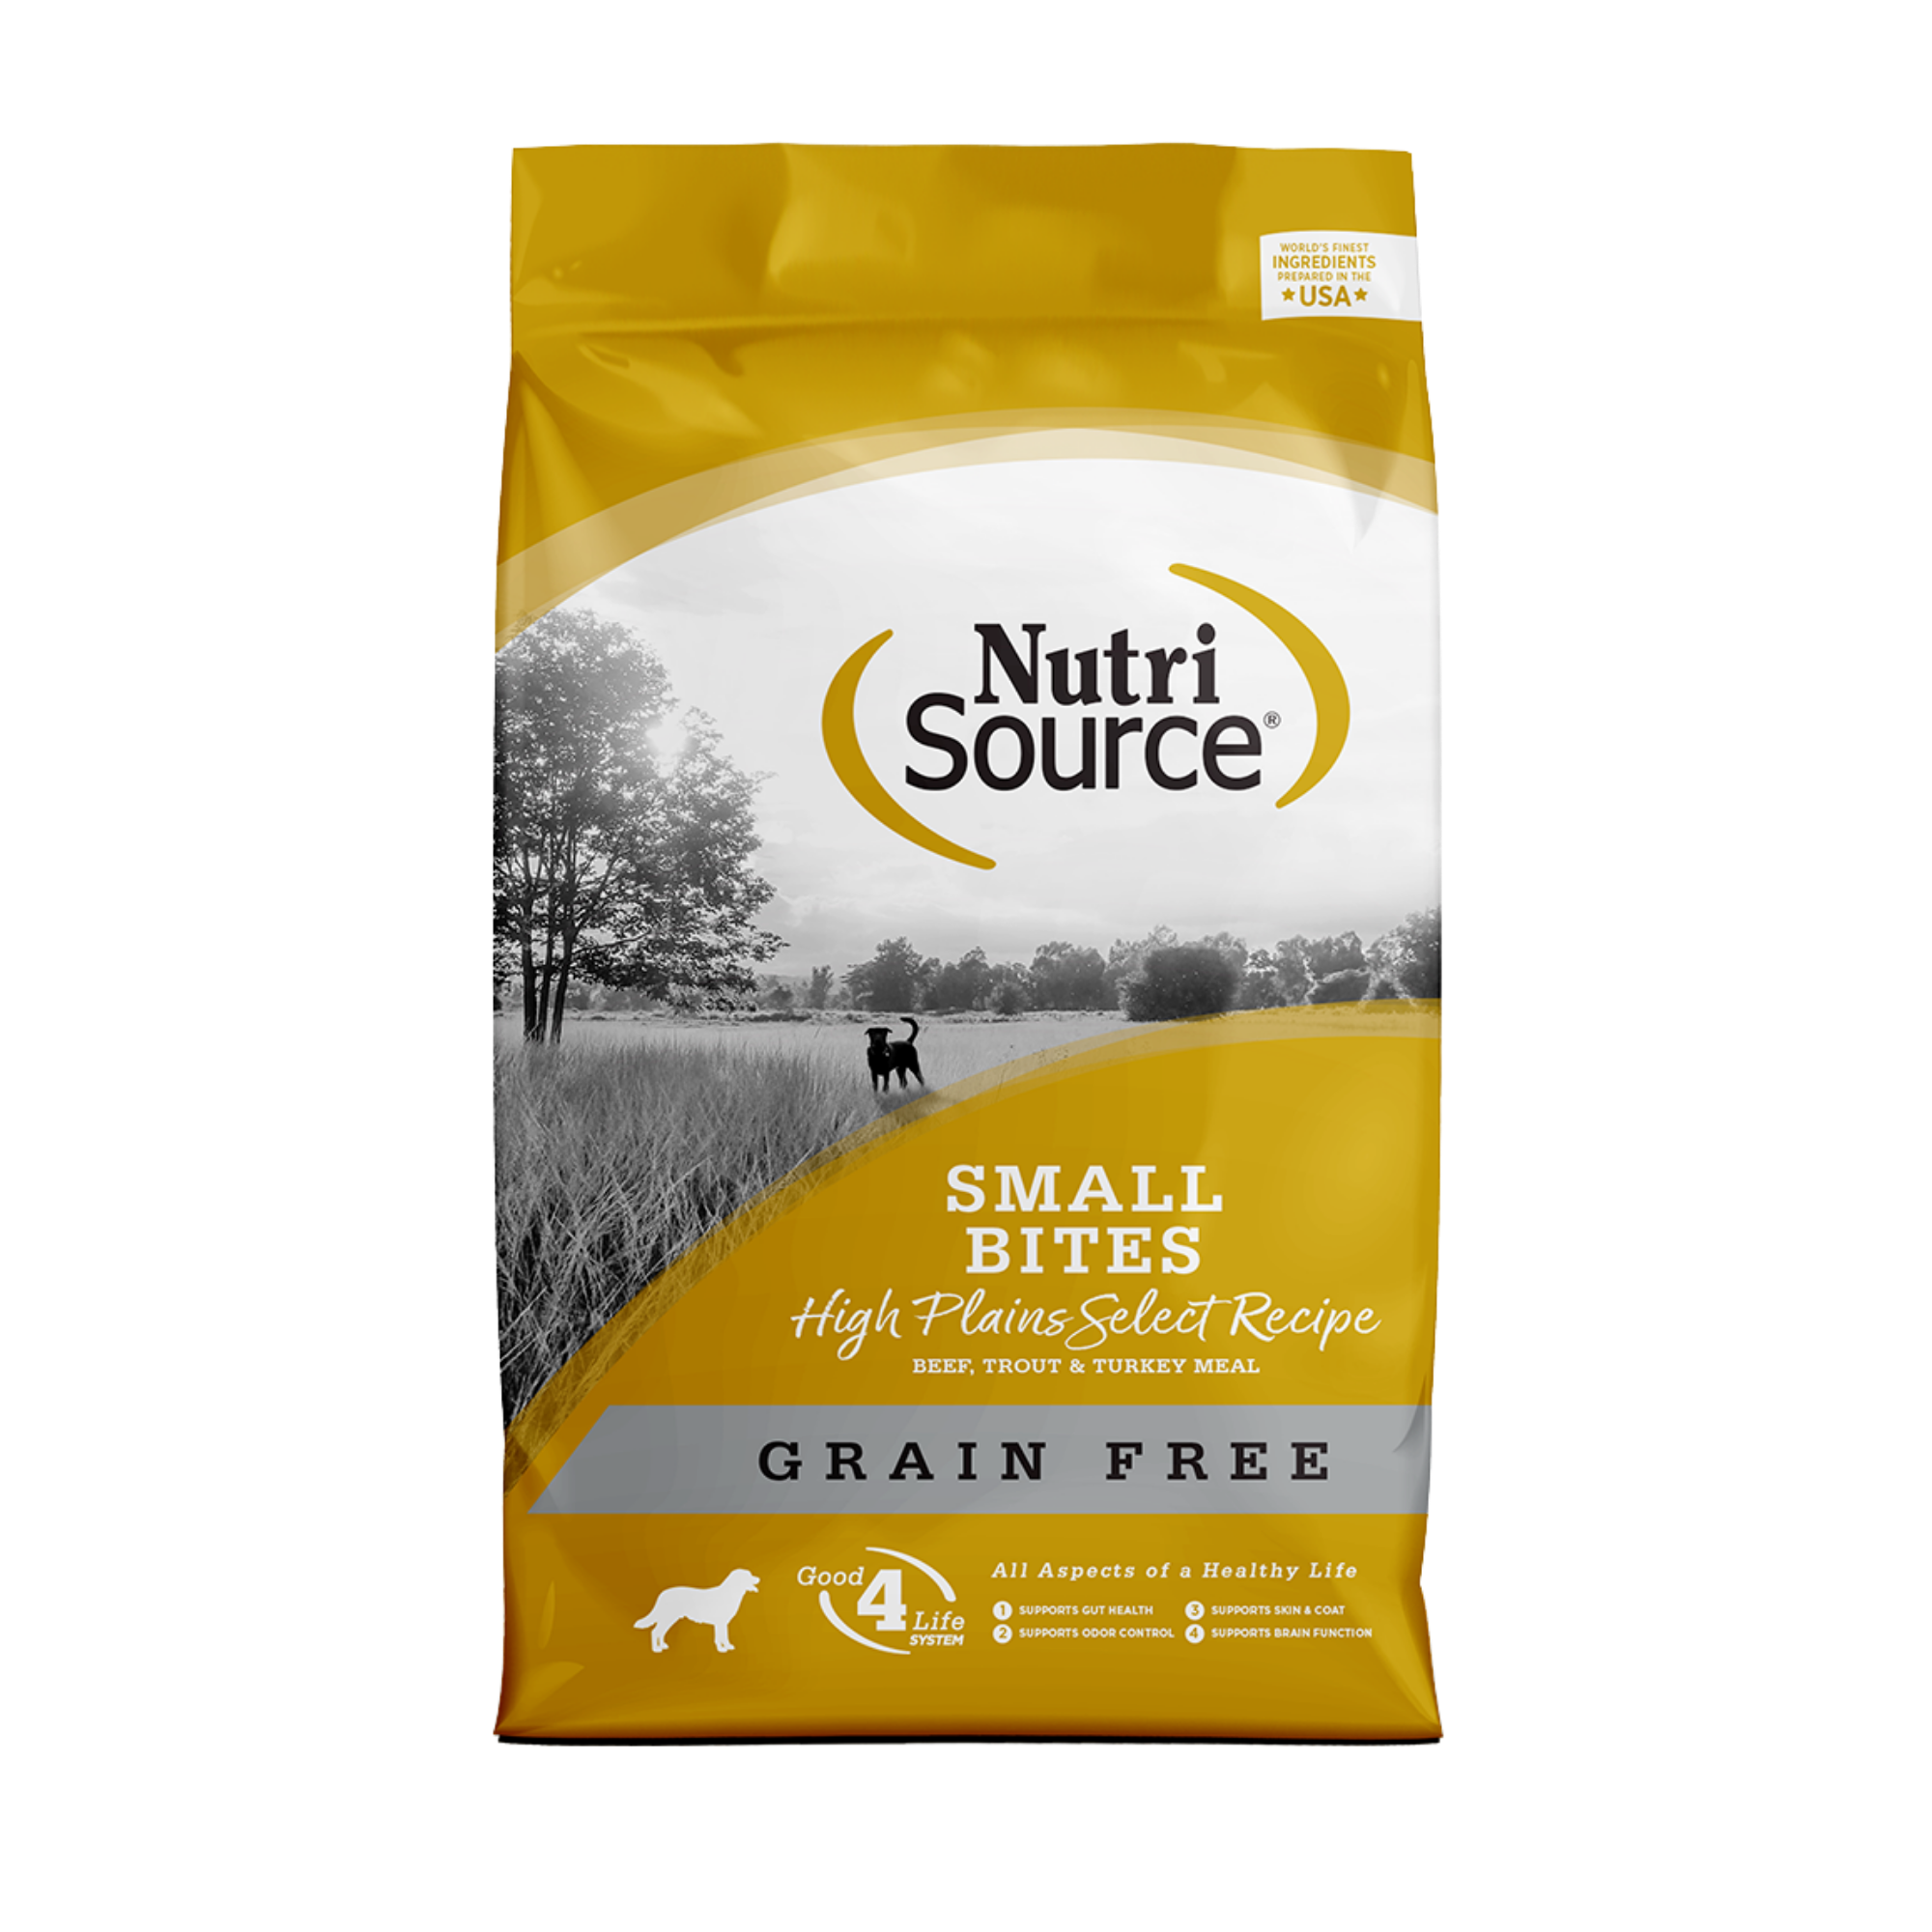 NutriSource Grain-Free Small Bites High Plains Select Formula Dry Dog Food - Mutts & Co.